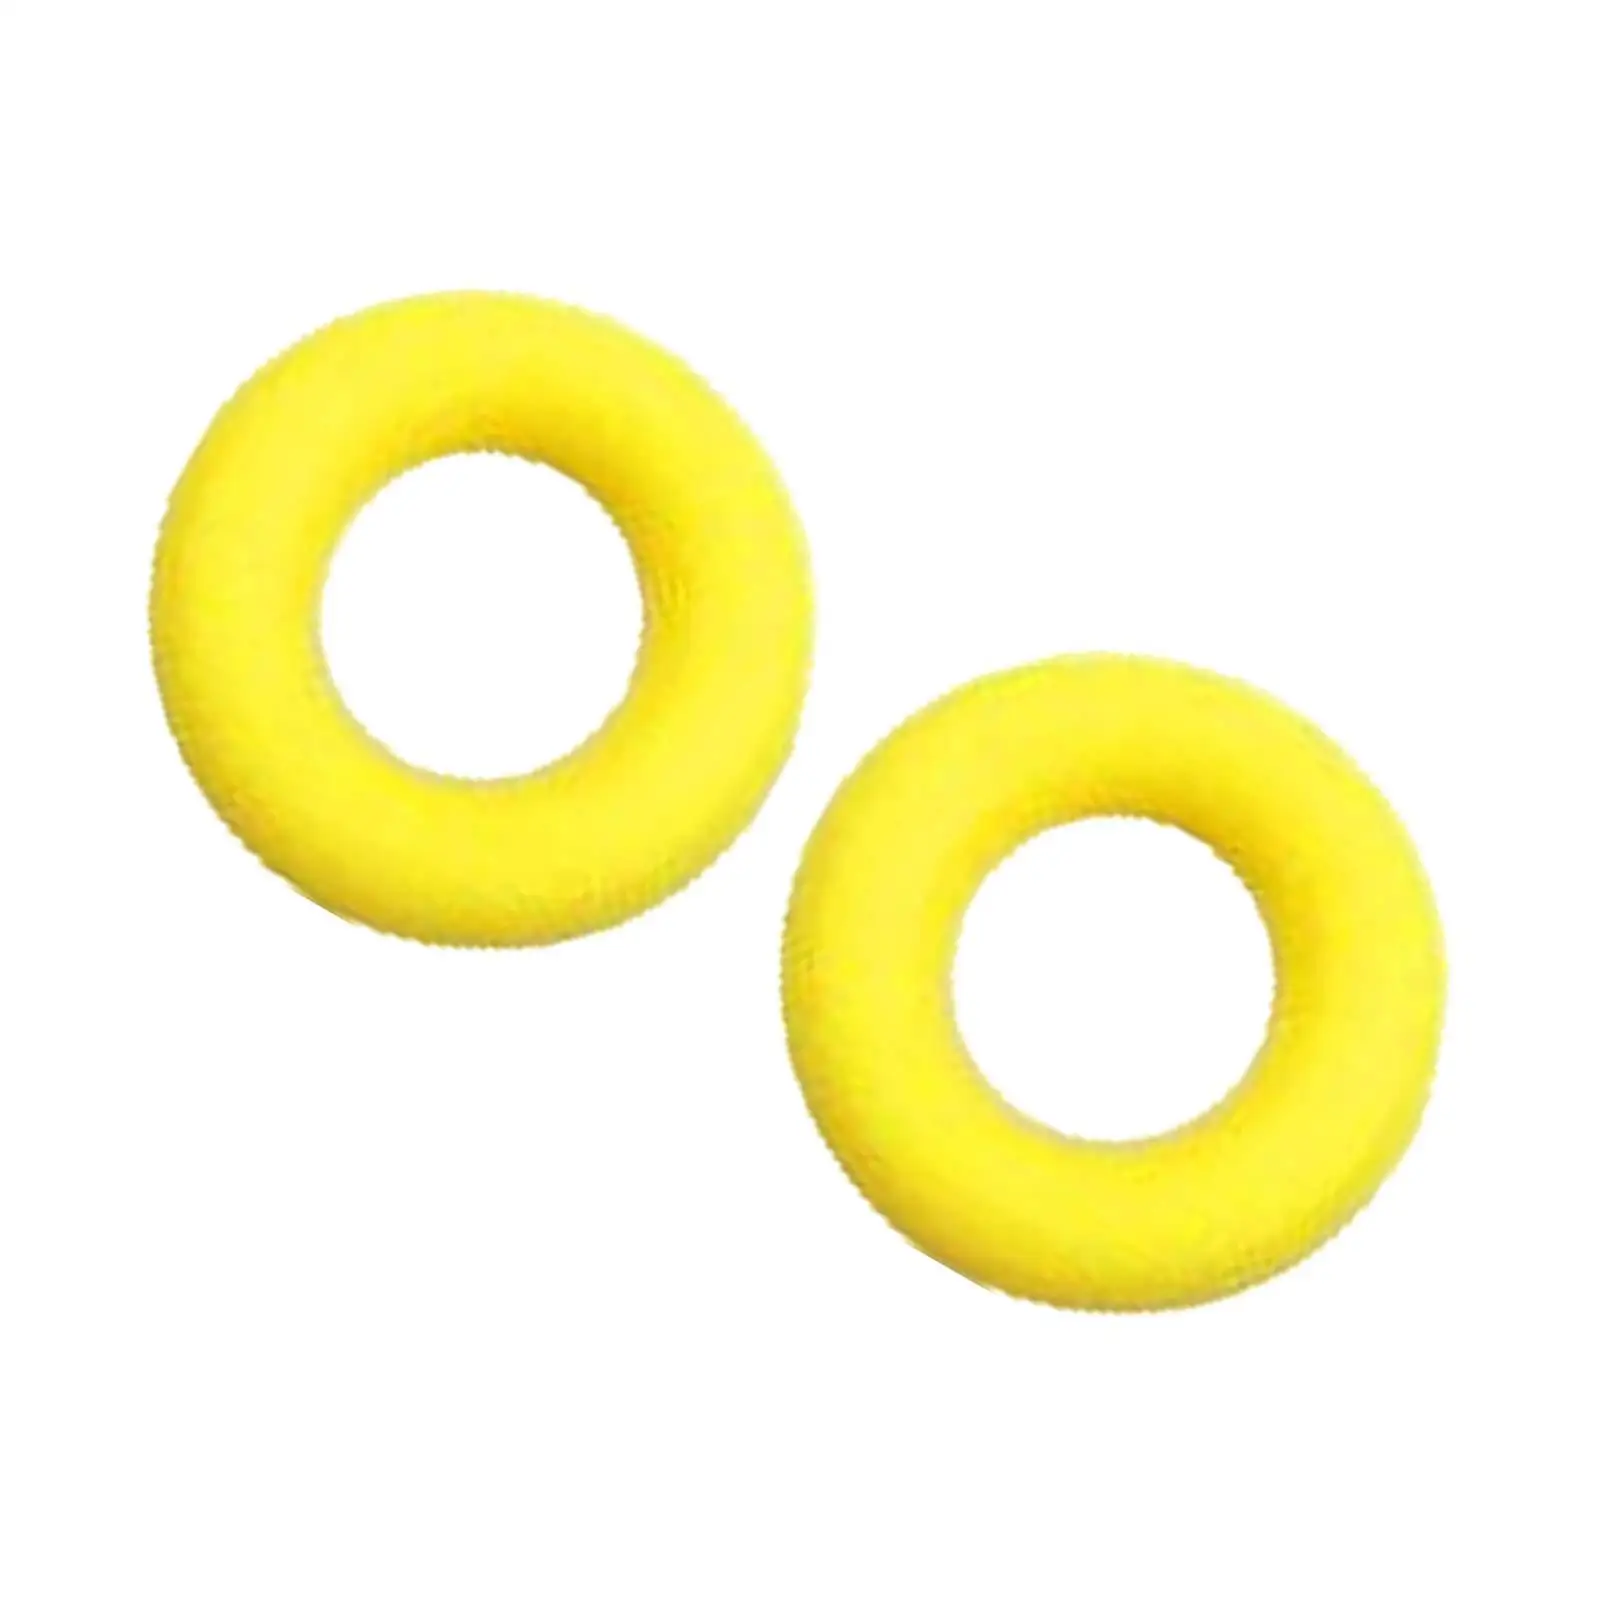 2Pcs Glasses Ear Grips Eyeglass Leg Pads Temple Tip Sleeve Retainer Anti Slip Silicone for Spectacles Eyewear Kids Adults